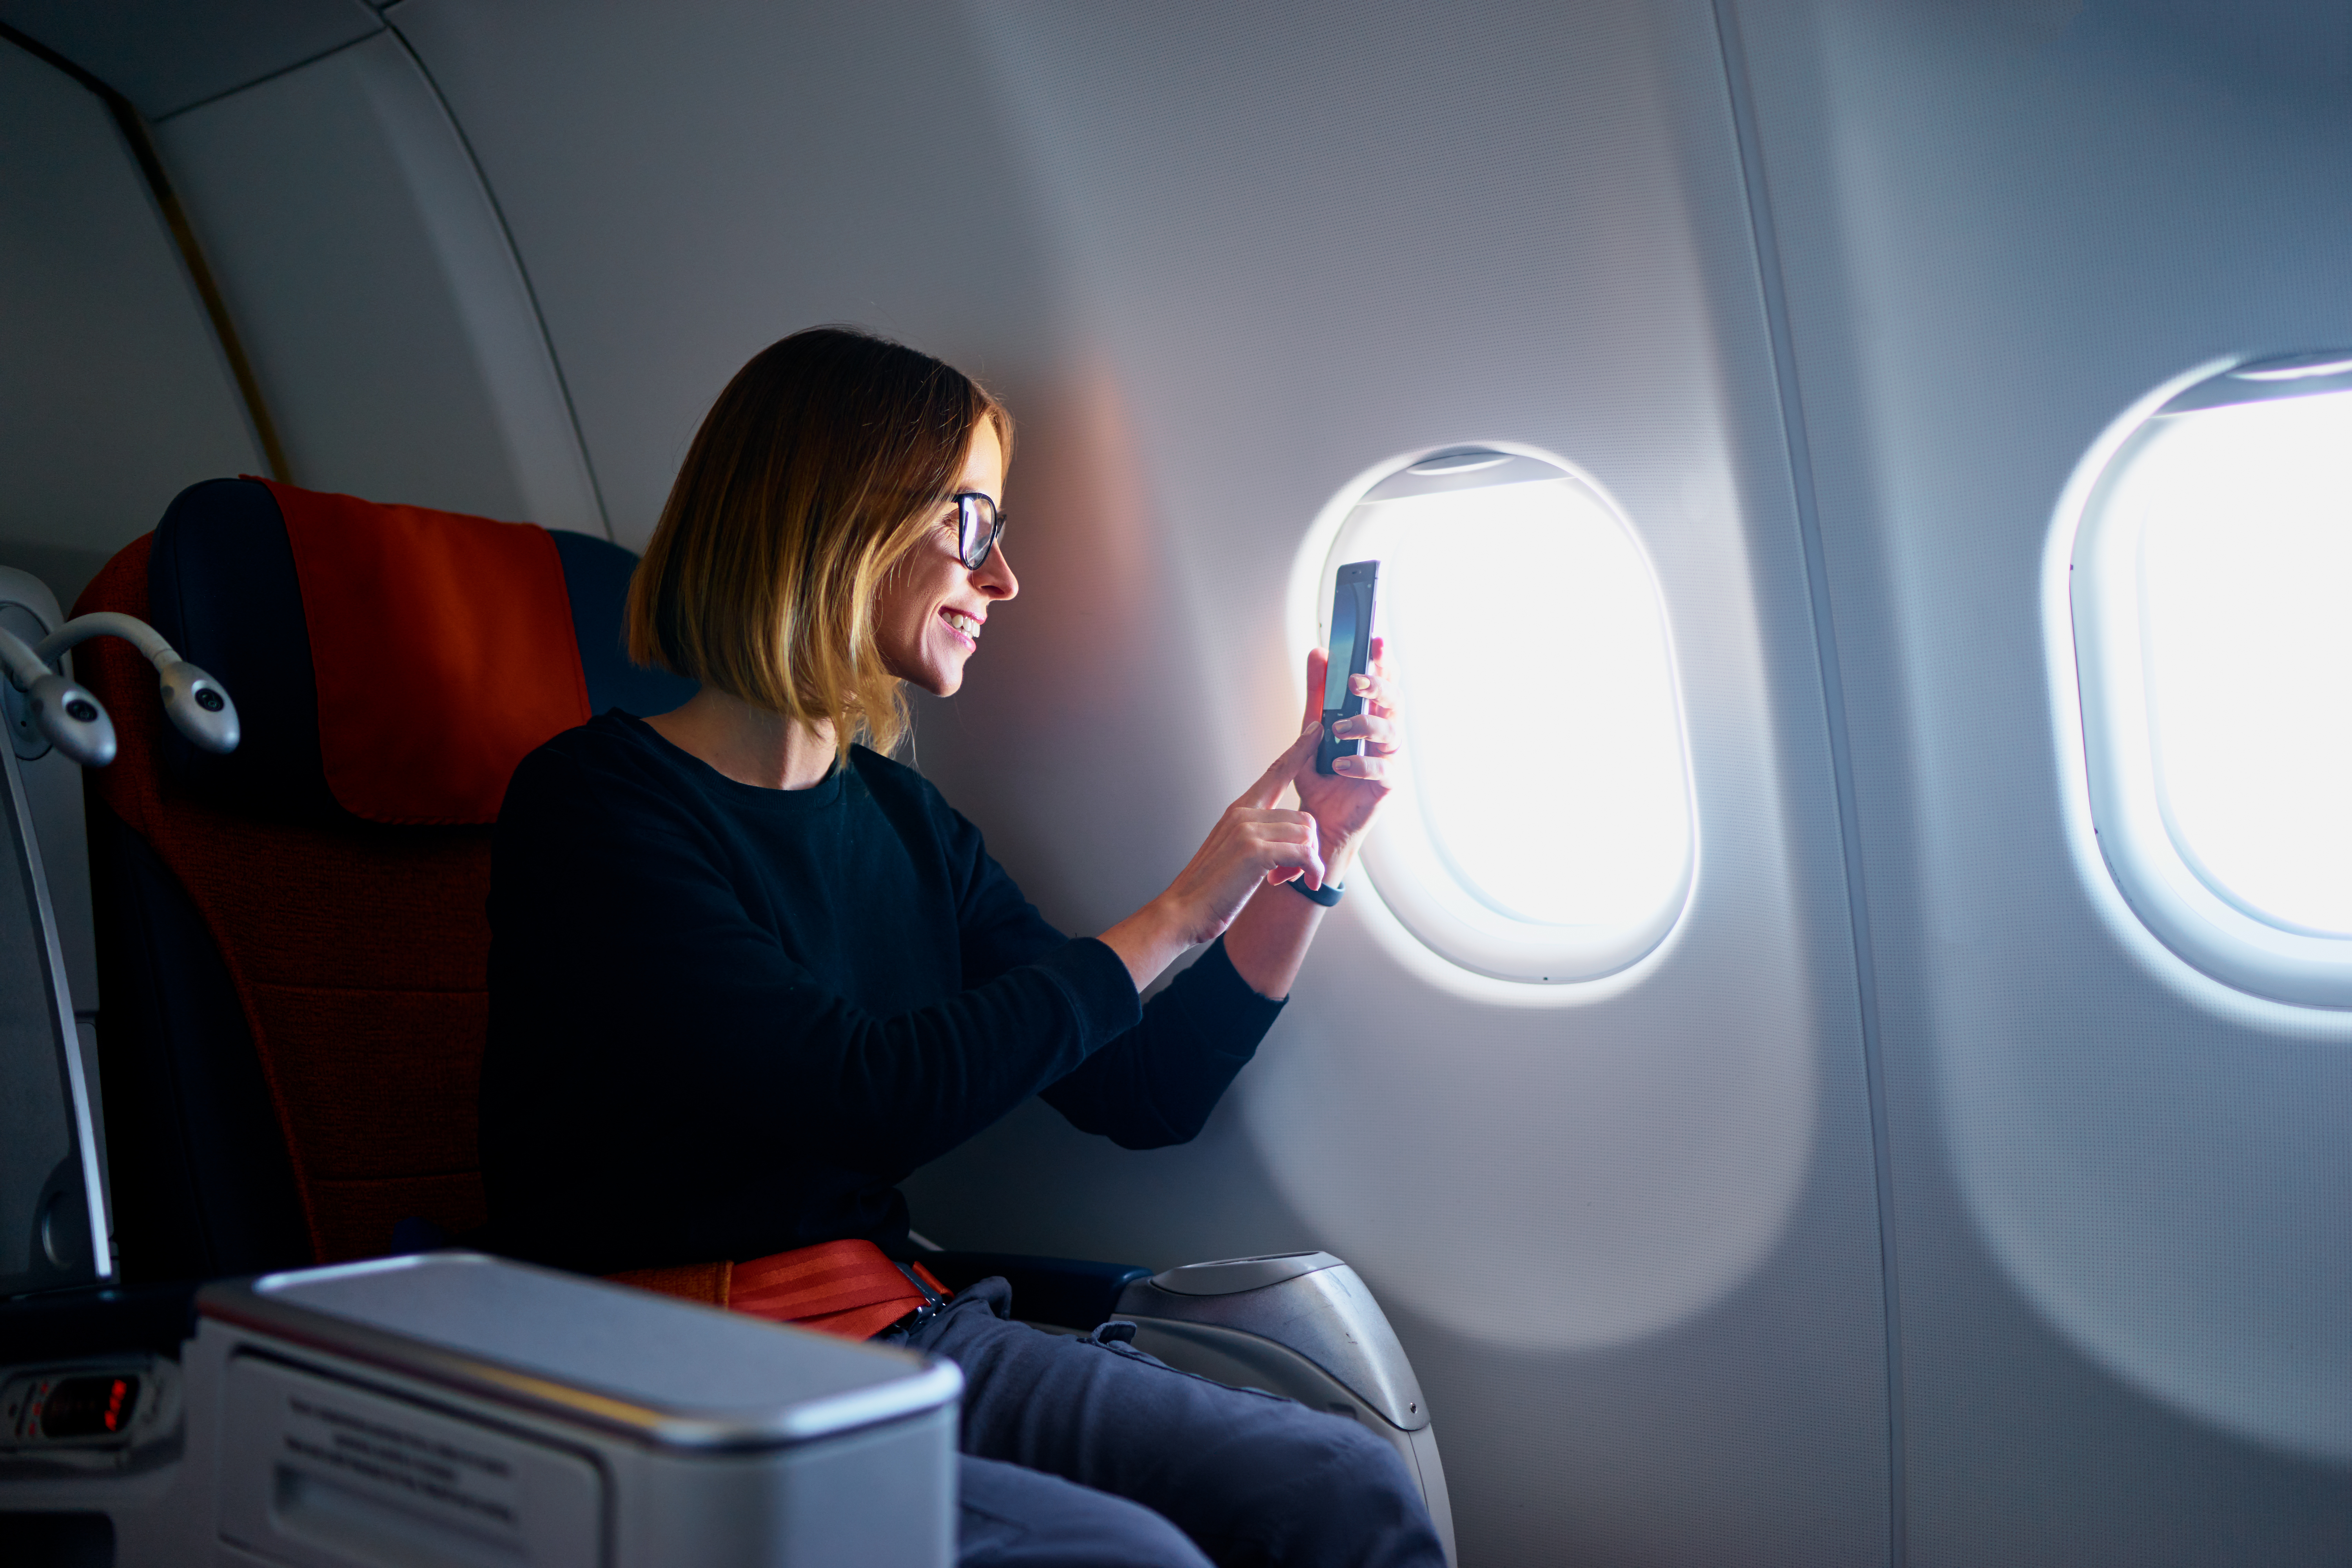 A woman uses her phone while relaxing in an airplane seat.